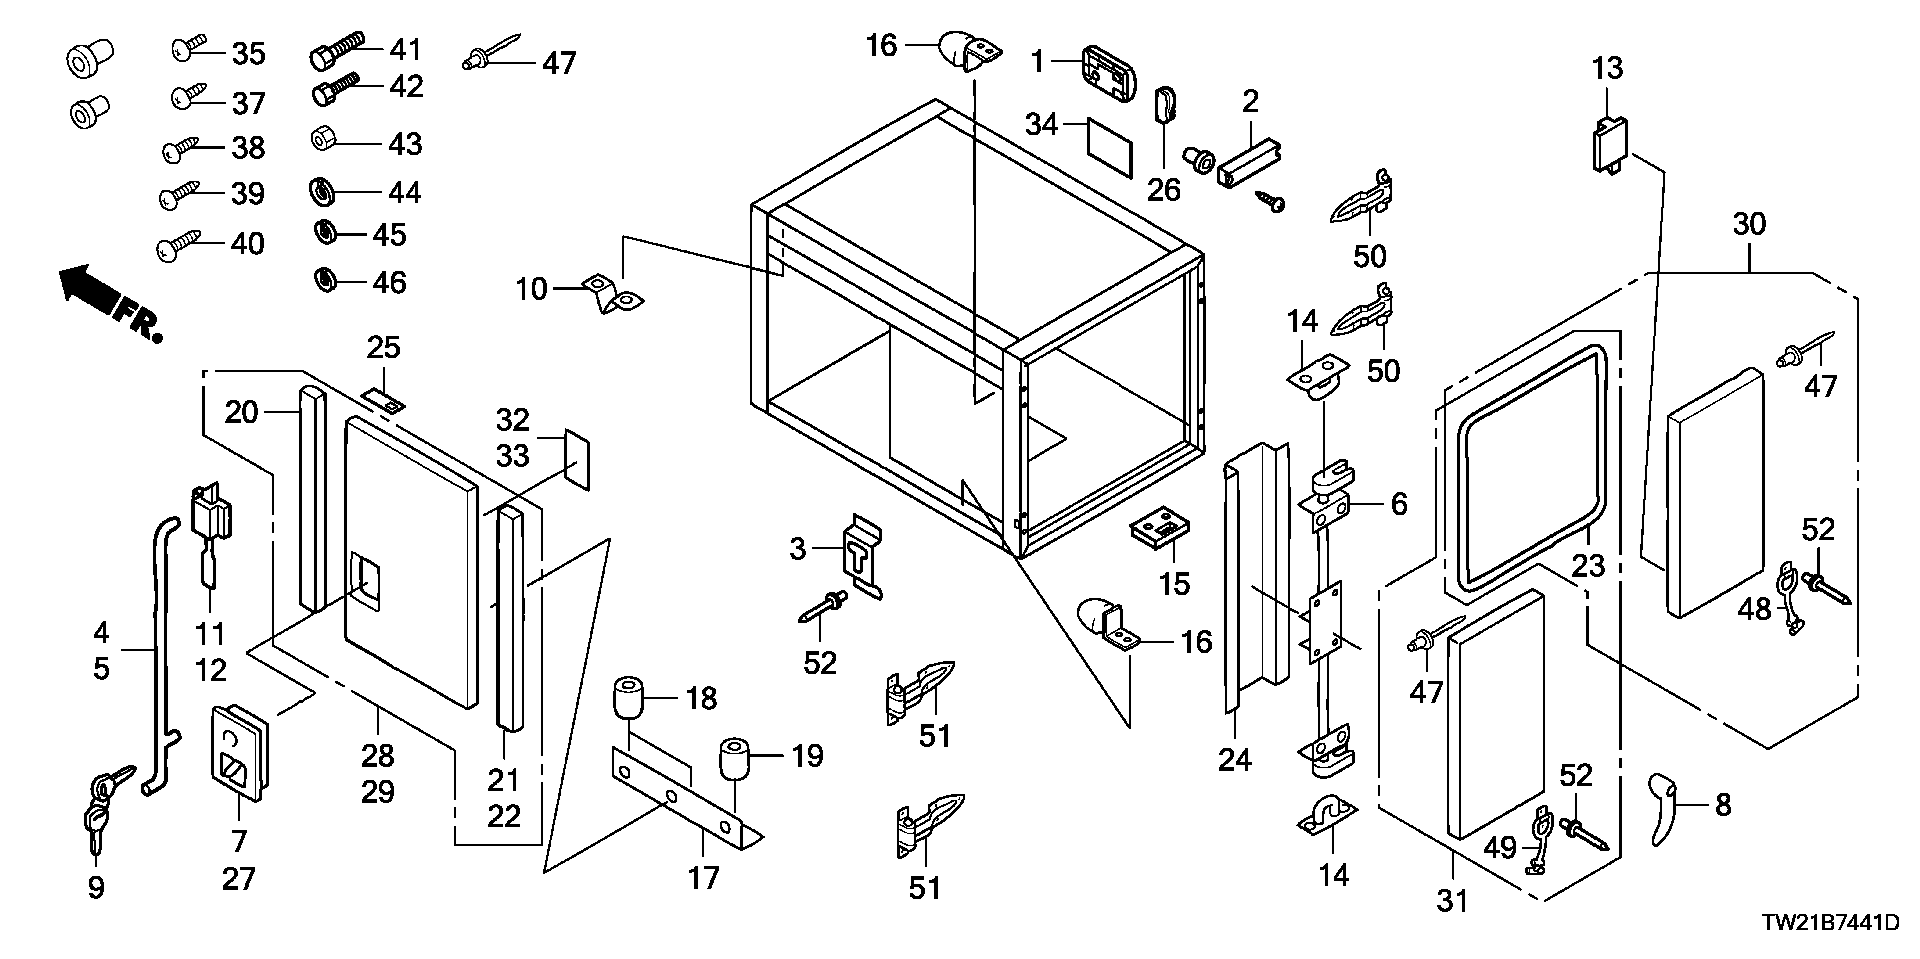 BOX  COMPONENT PARTS ( DRYU  TYPE )